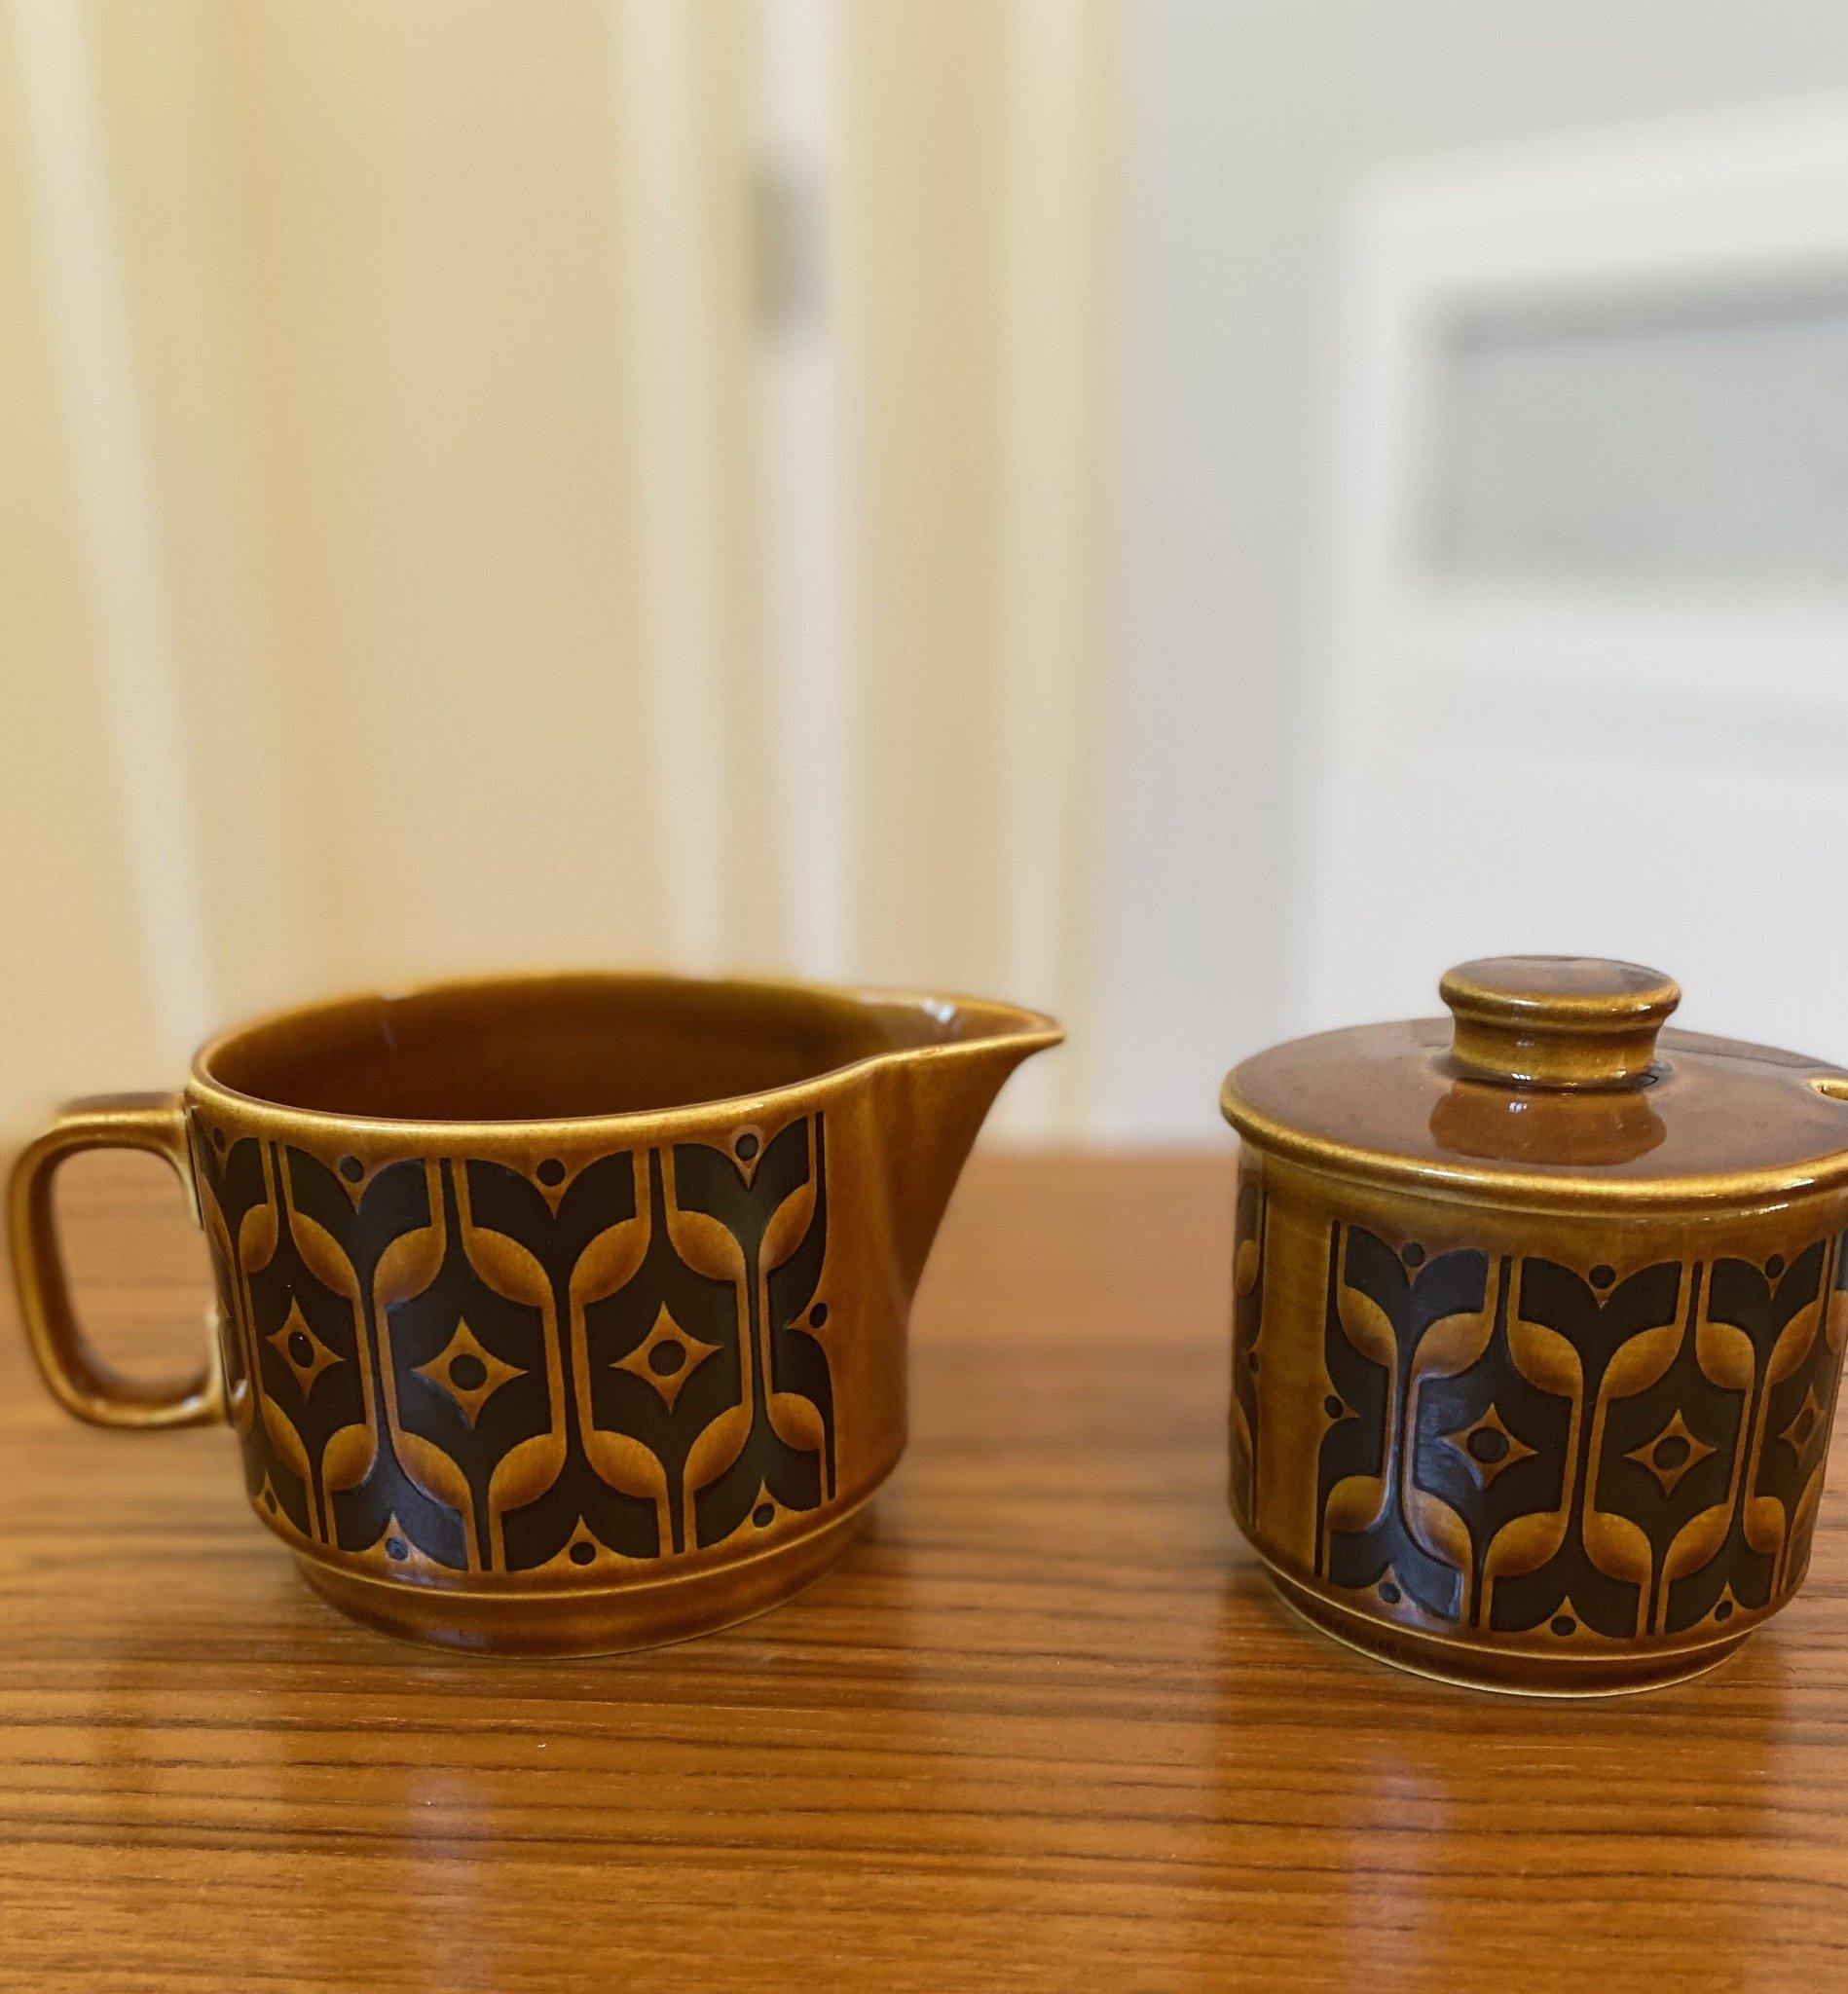 Brown Hornsea Heirloom Creamer on the left and sugar with lid on the right- Cook Street Vintage